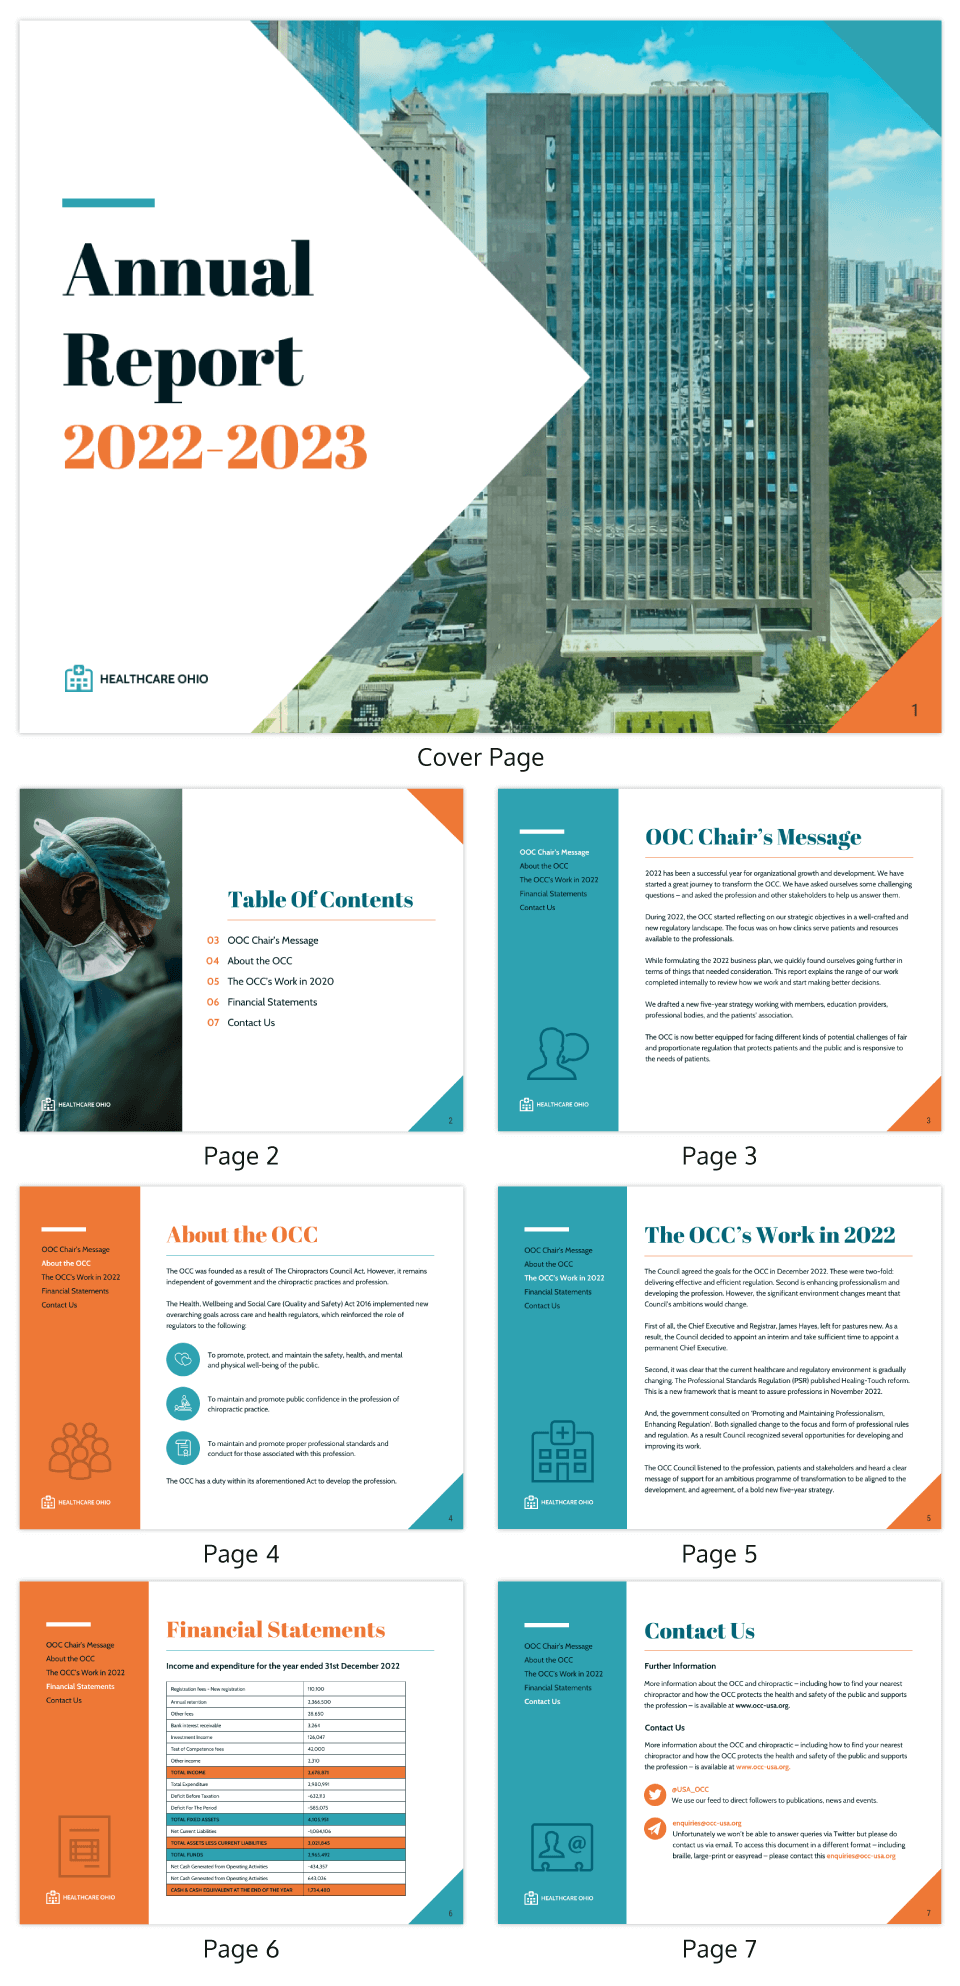 Cover of the Annual Report for 2022-2023 for Healthcare Ohio, featuring a large image of a modern, multi-story healthcare facility.